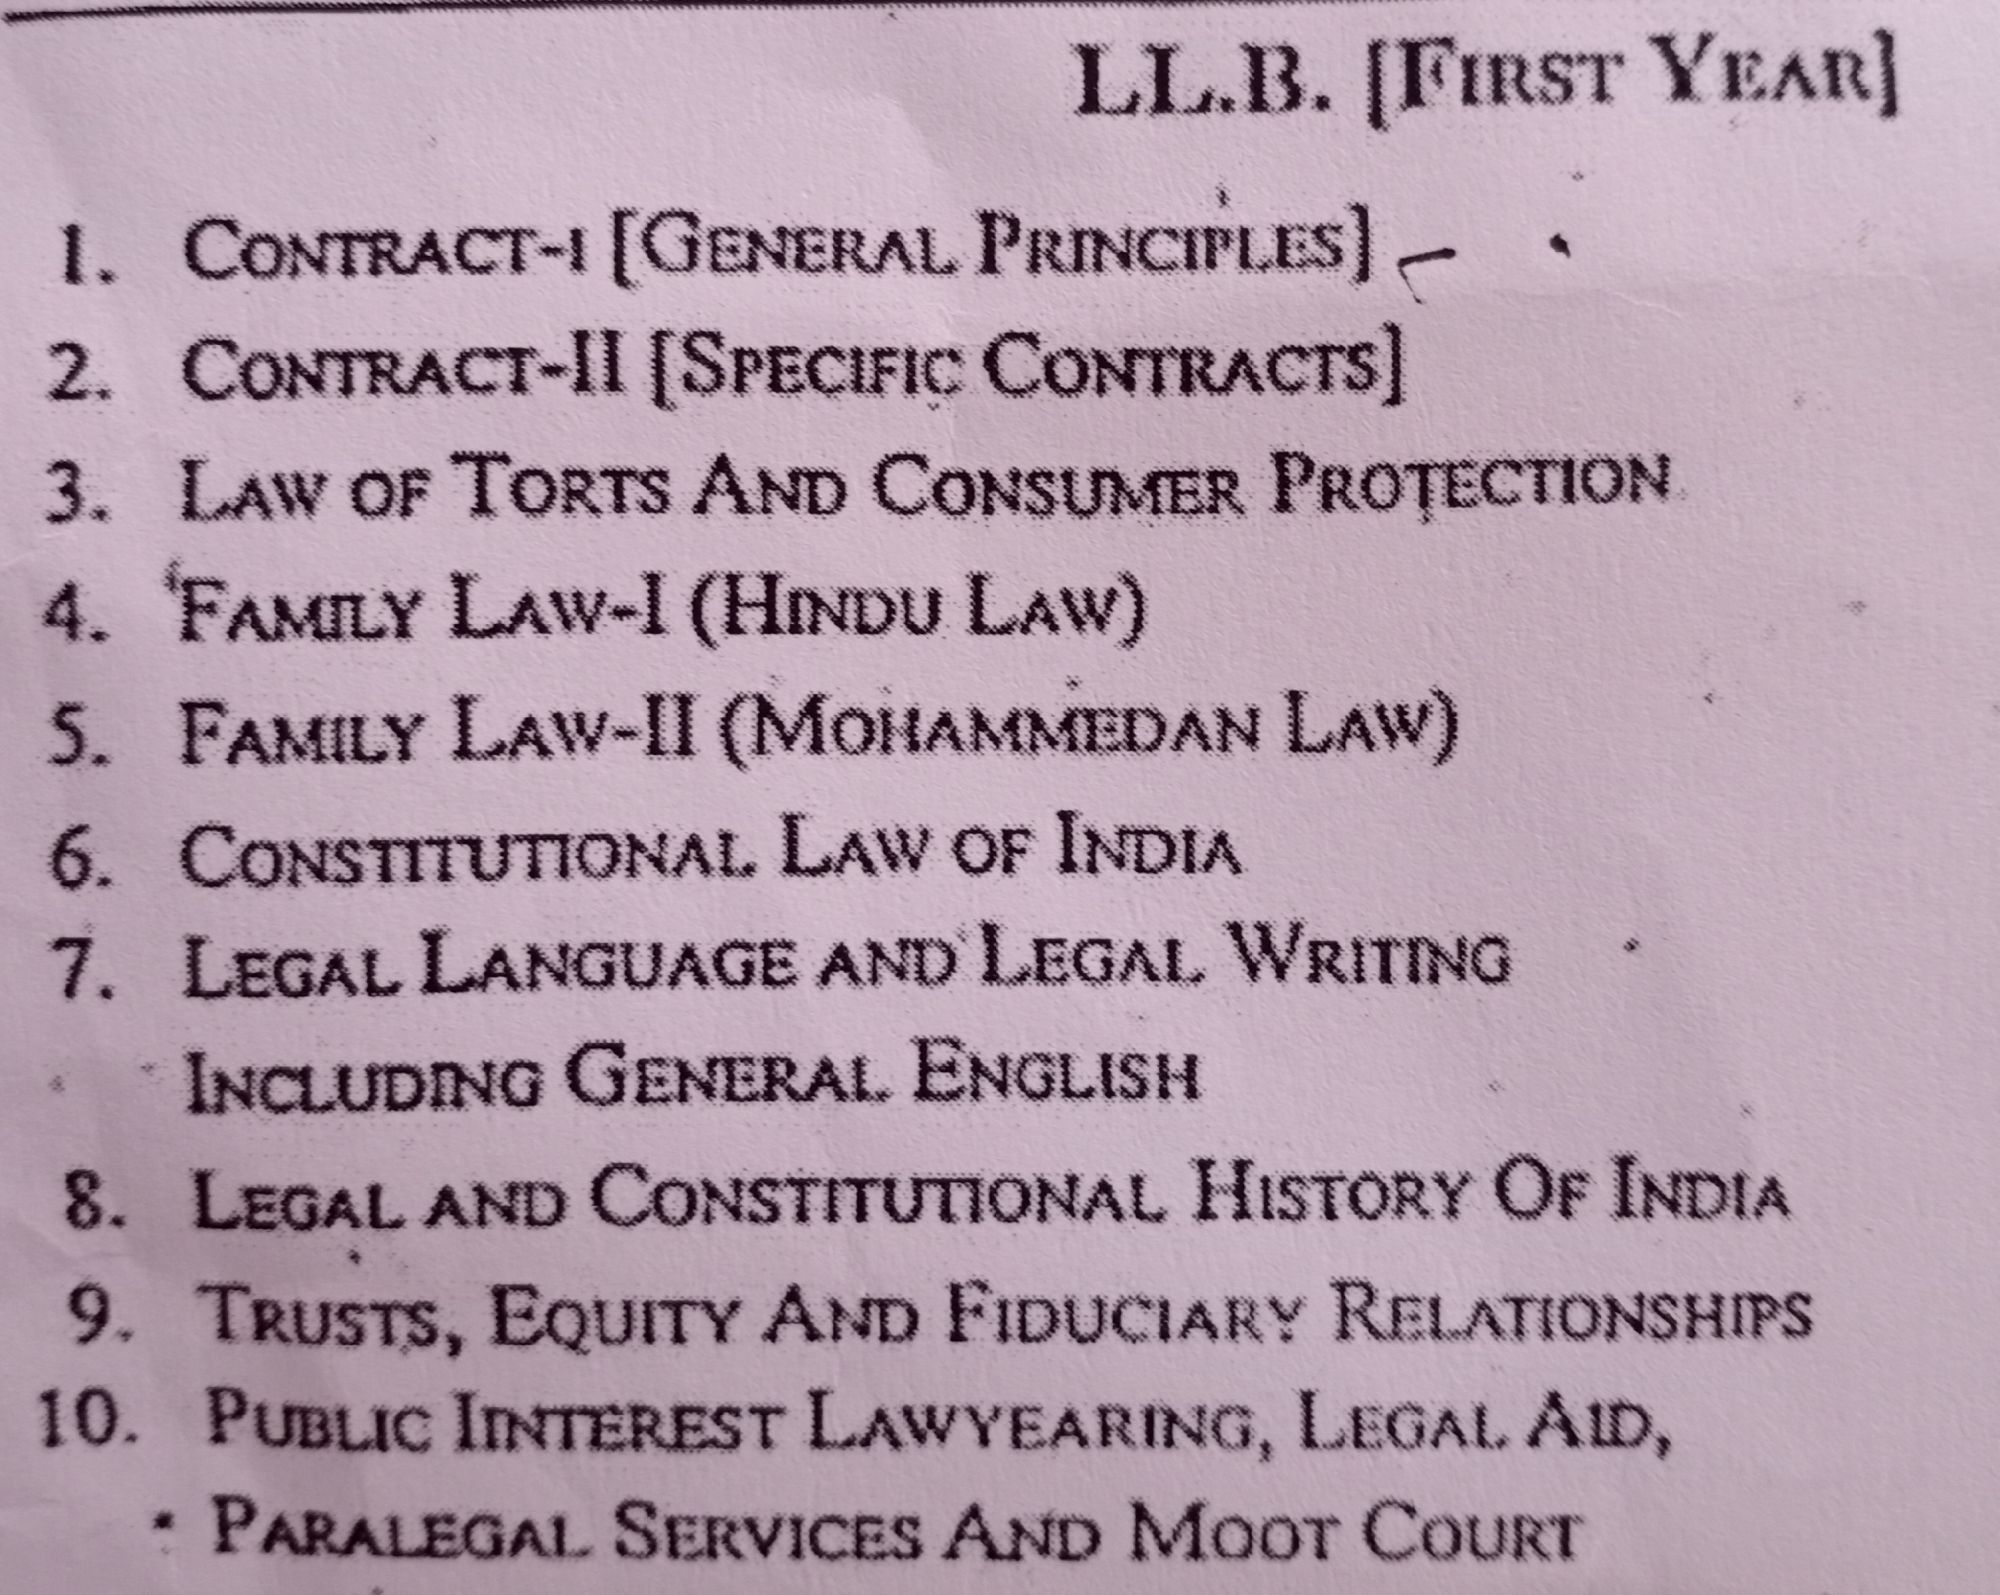 Basanti Lal Babel Legal And Constitutional History of India in English Medium